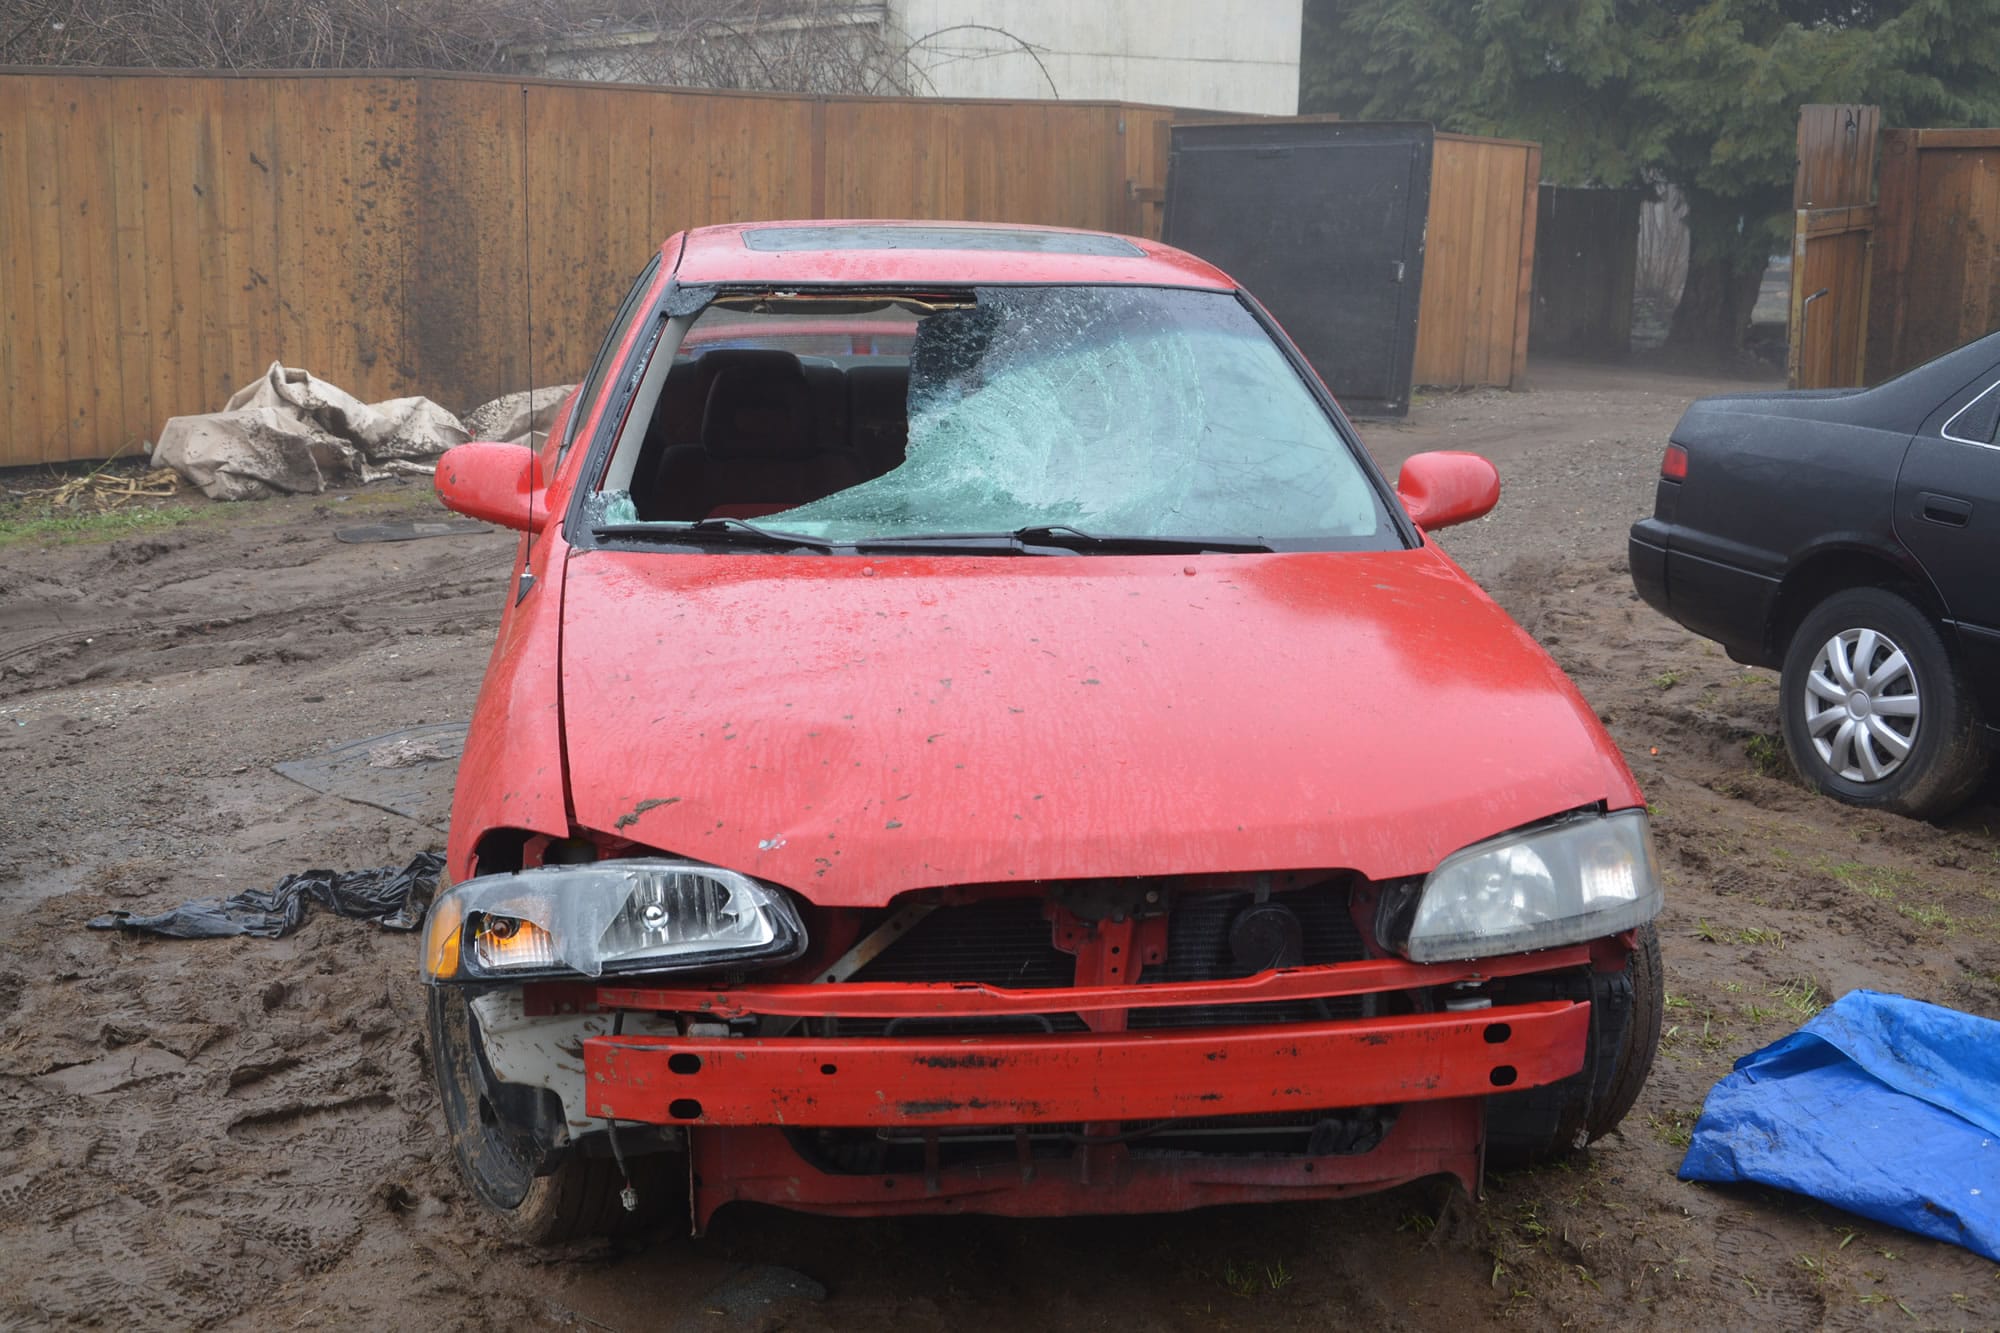 Clark County sheriff's deputies on Feb. 22 tracked down this car, which they suspect struck and severely injured a man walking in the Truman neighborhood in a hit-and-run crash in the early morning hours of Feb. 20.